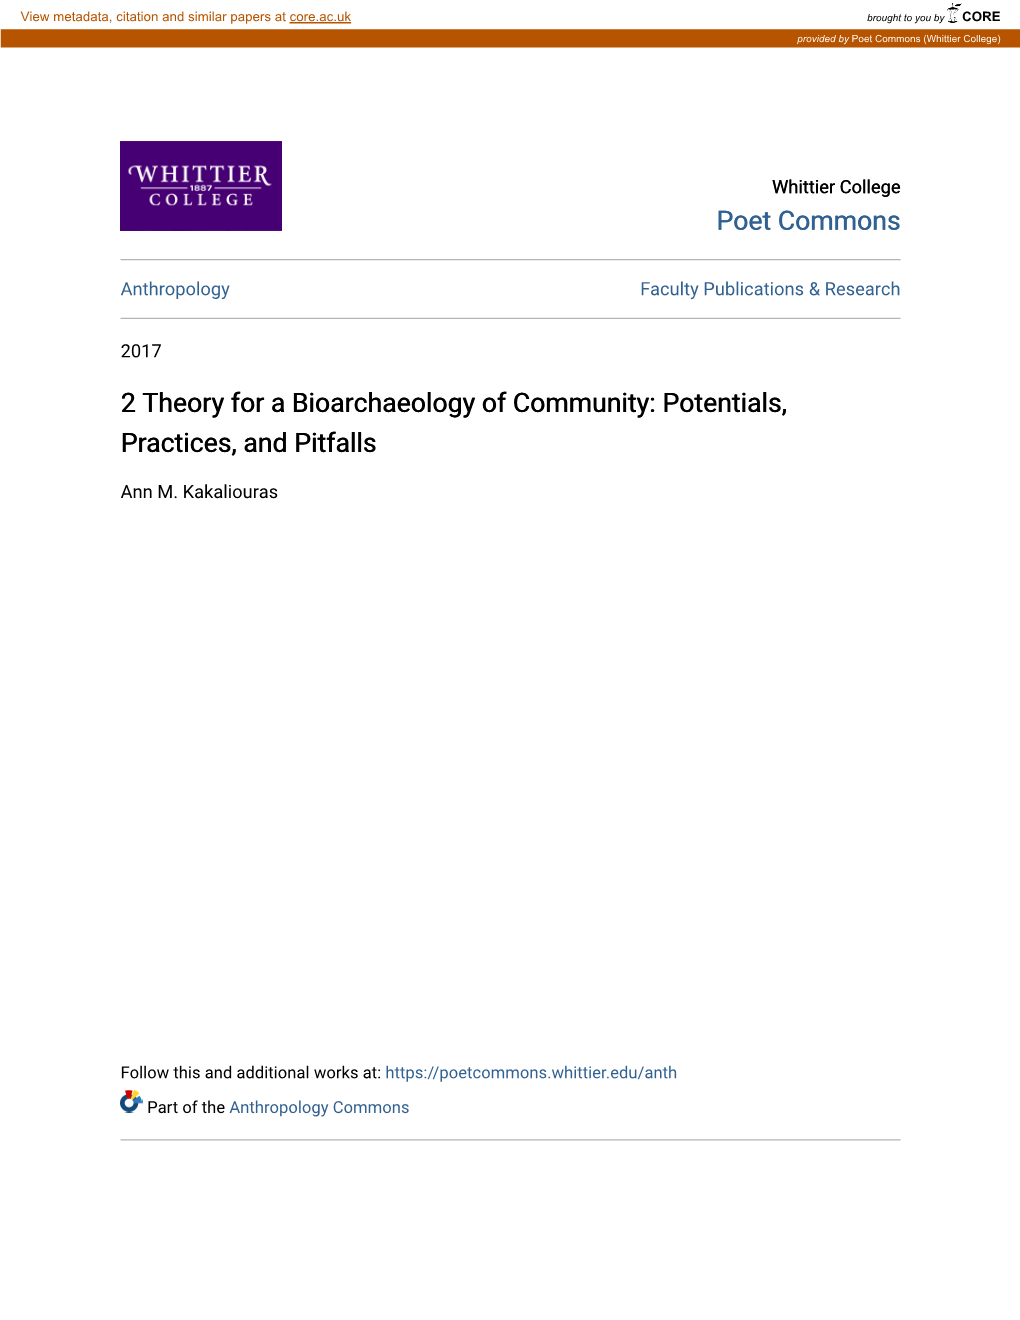 2 Theory for a Bioarchaeology of Community: Potentials, Practices, and Pitfalls